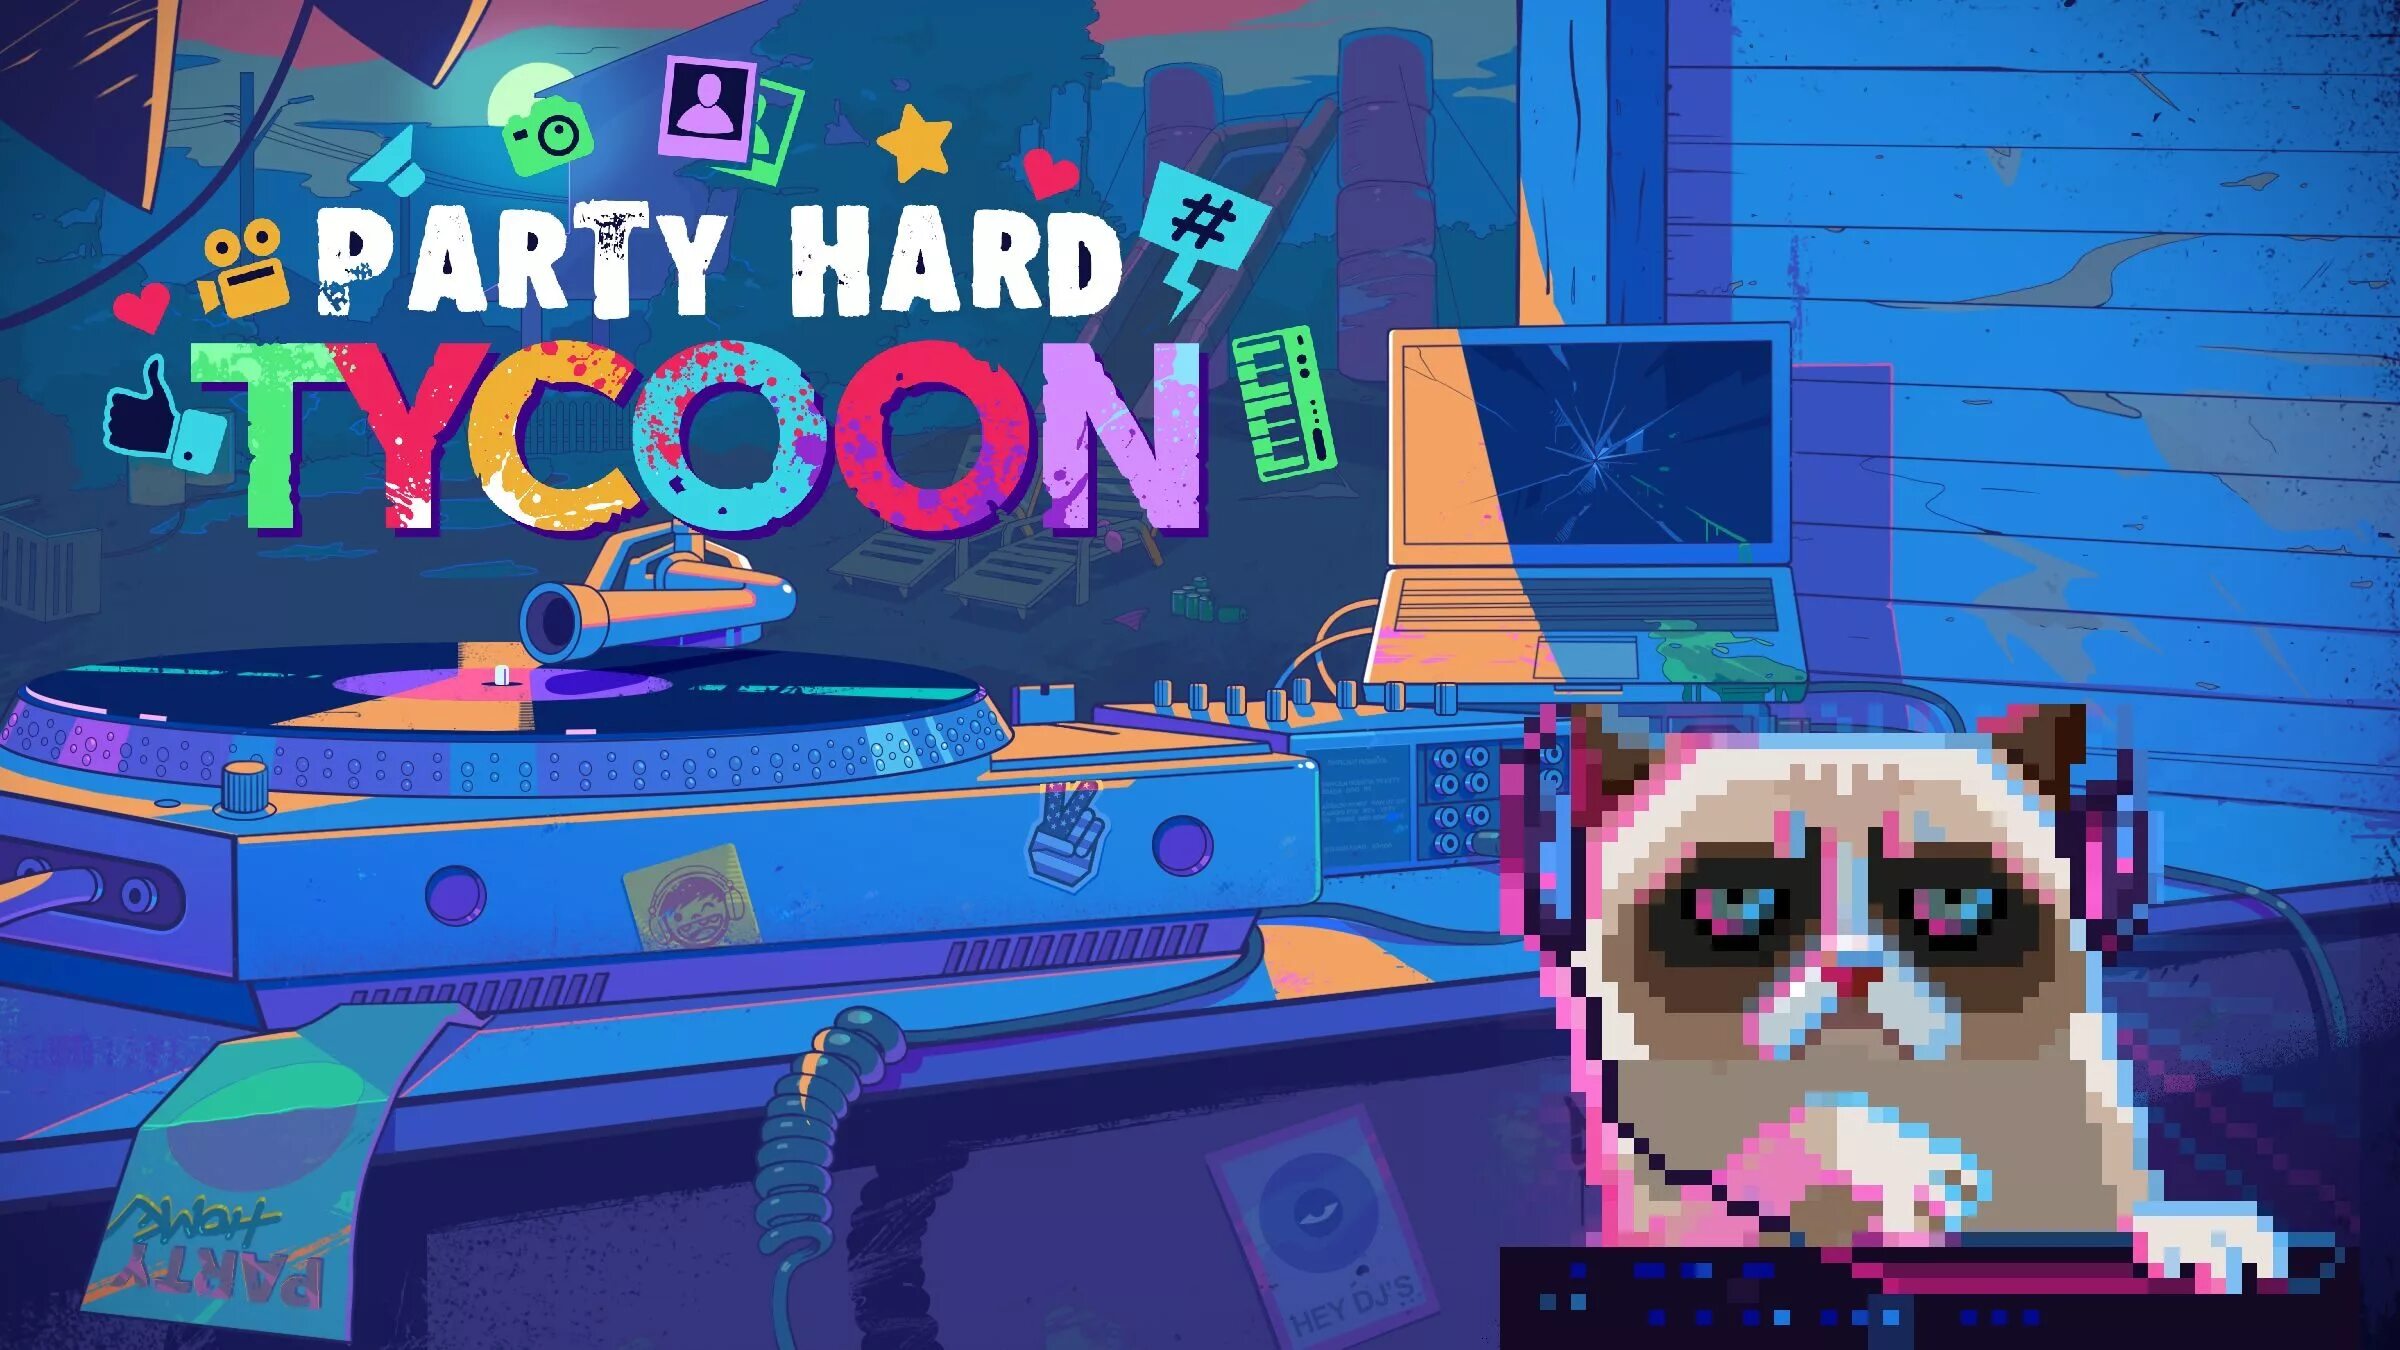 Party hard me. Пати Хард. Игра Party. Party hard обои. Party hard game.